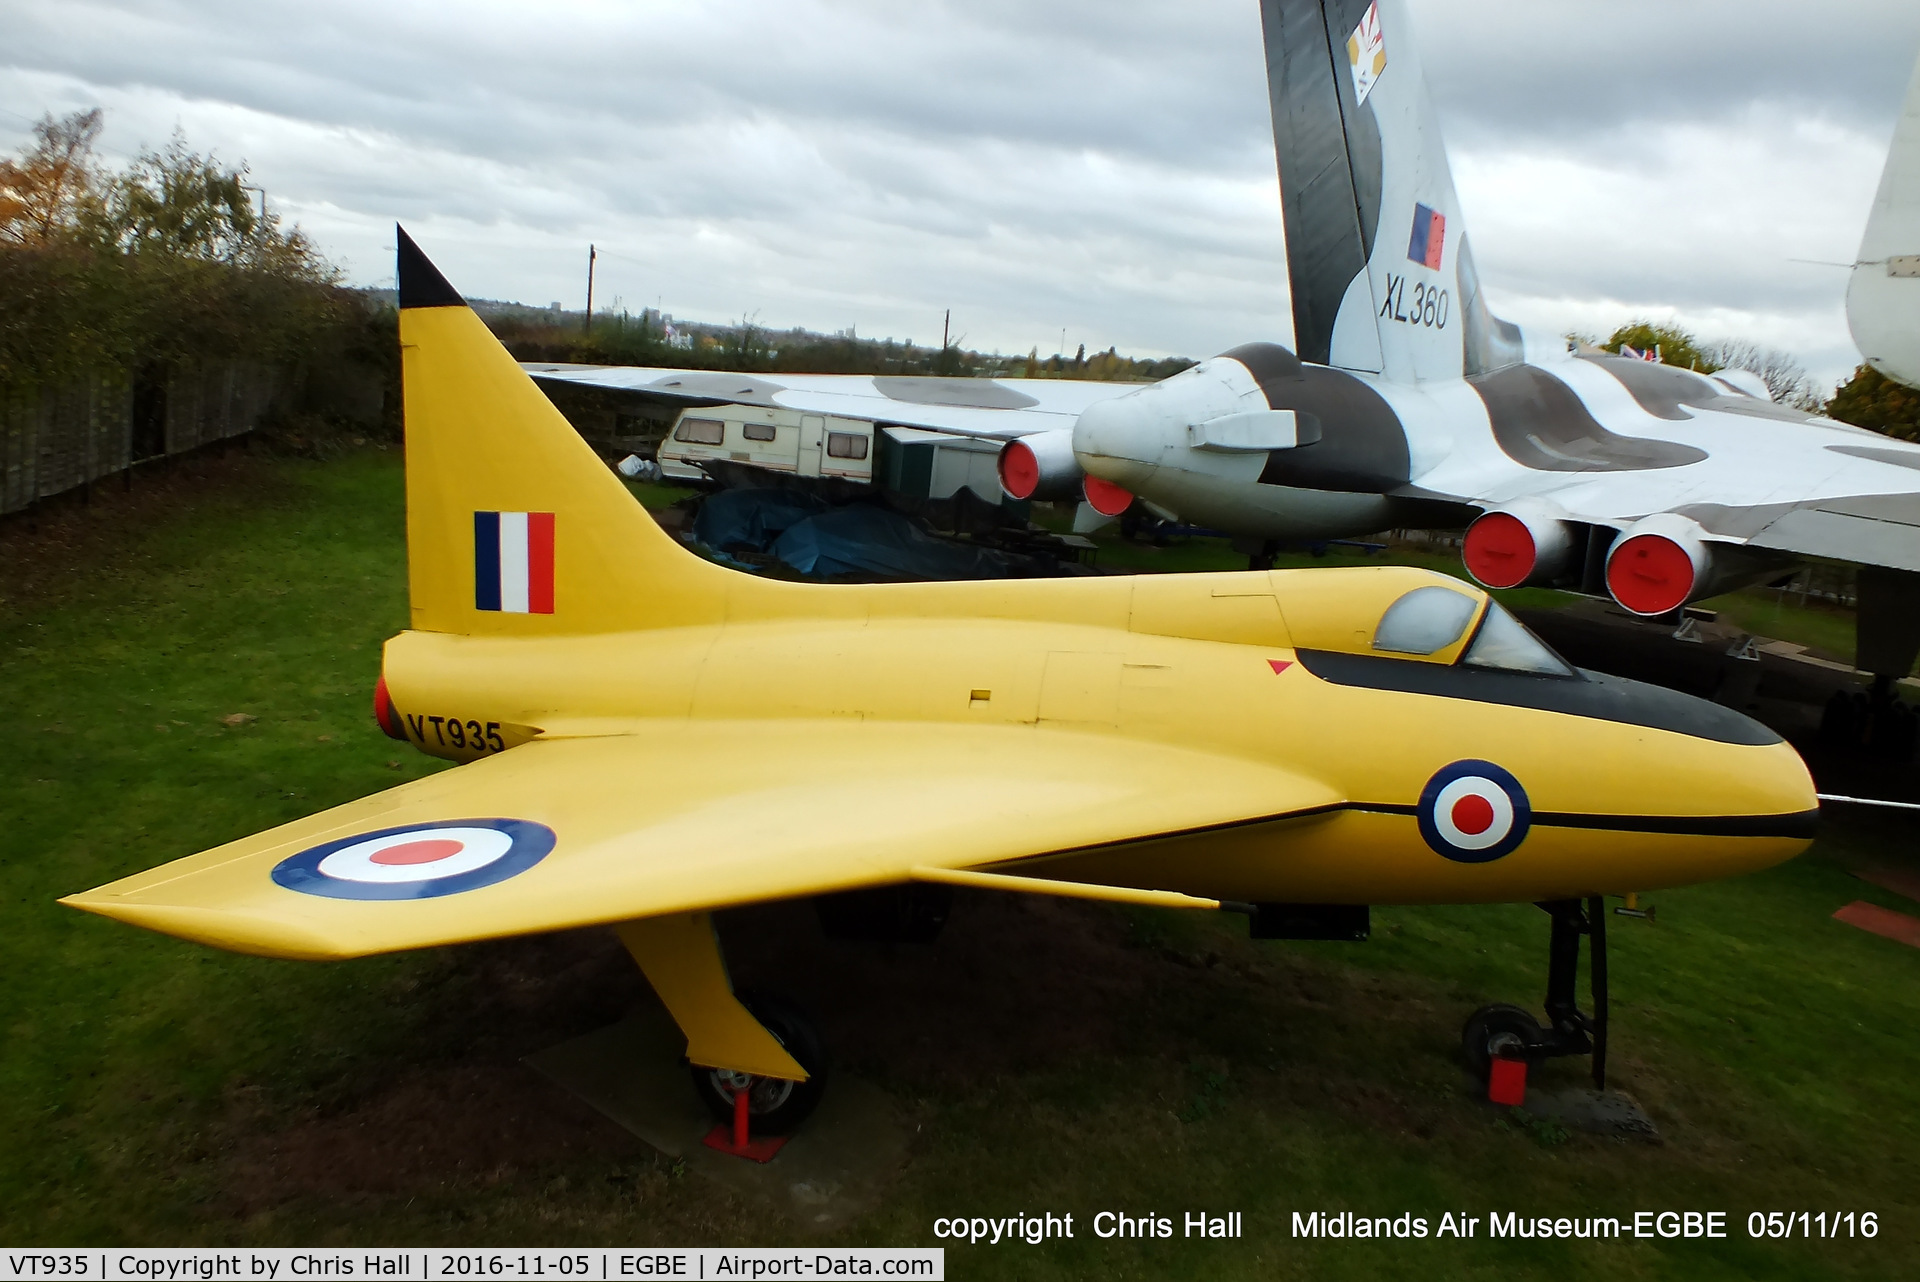 VT935, 1950 Boulton Paul P.111A C/N Not found VT935, preserved at the Midland Air Museum